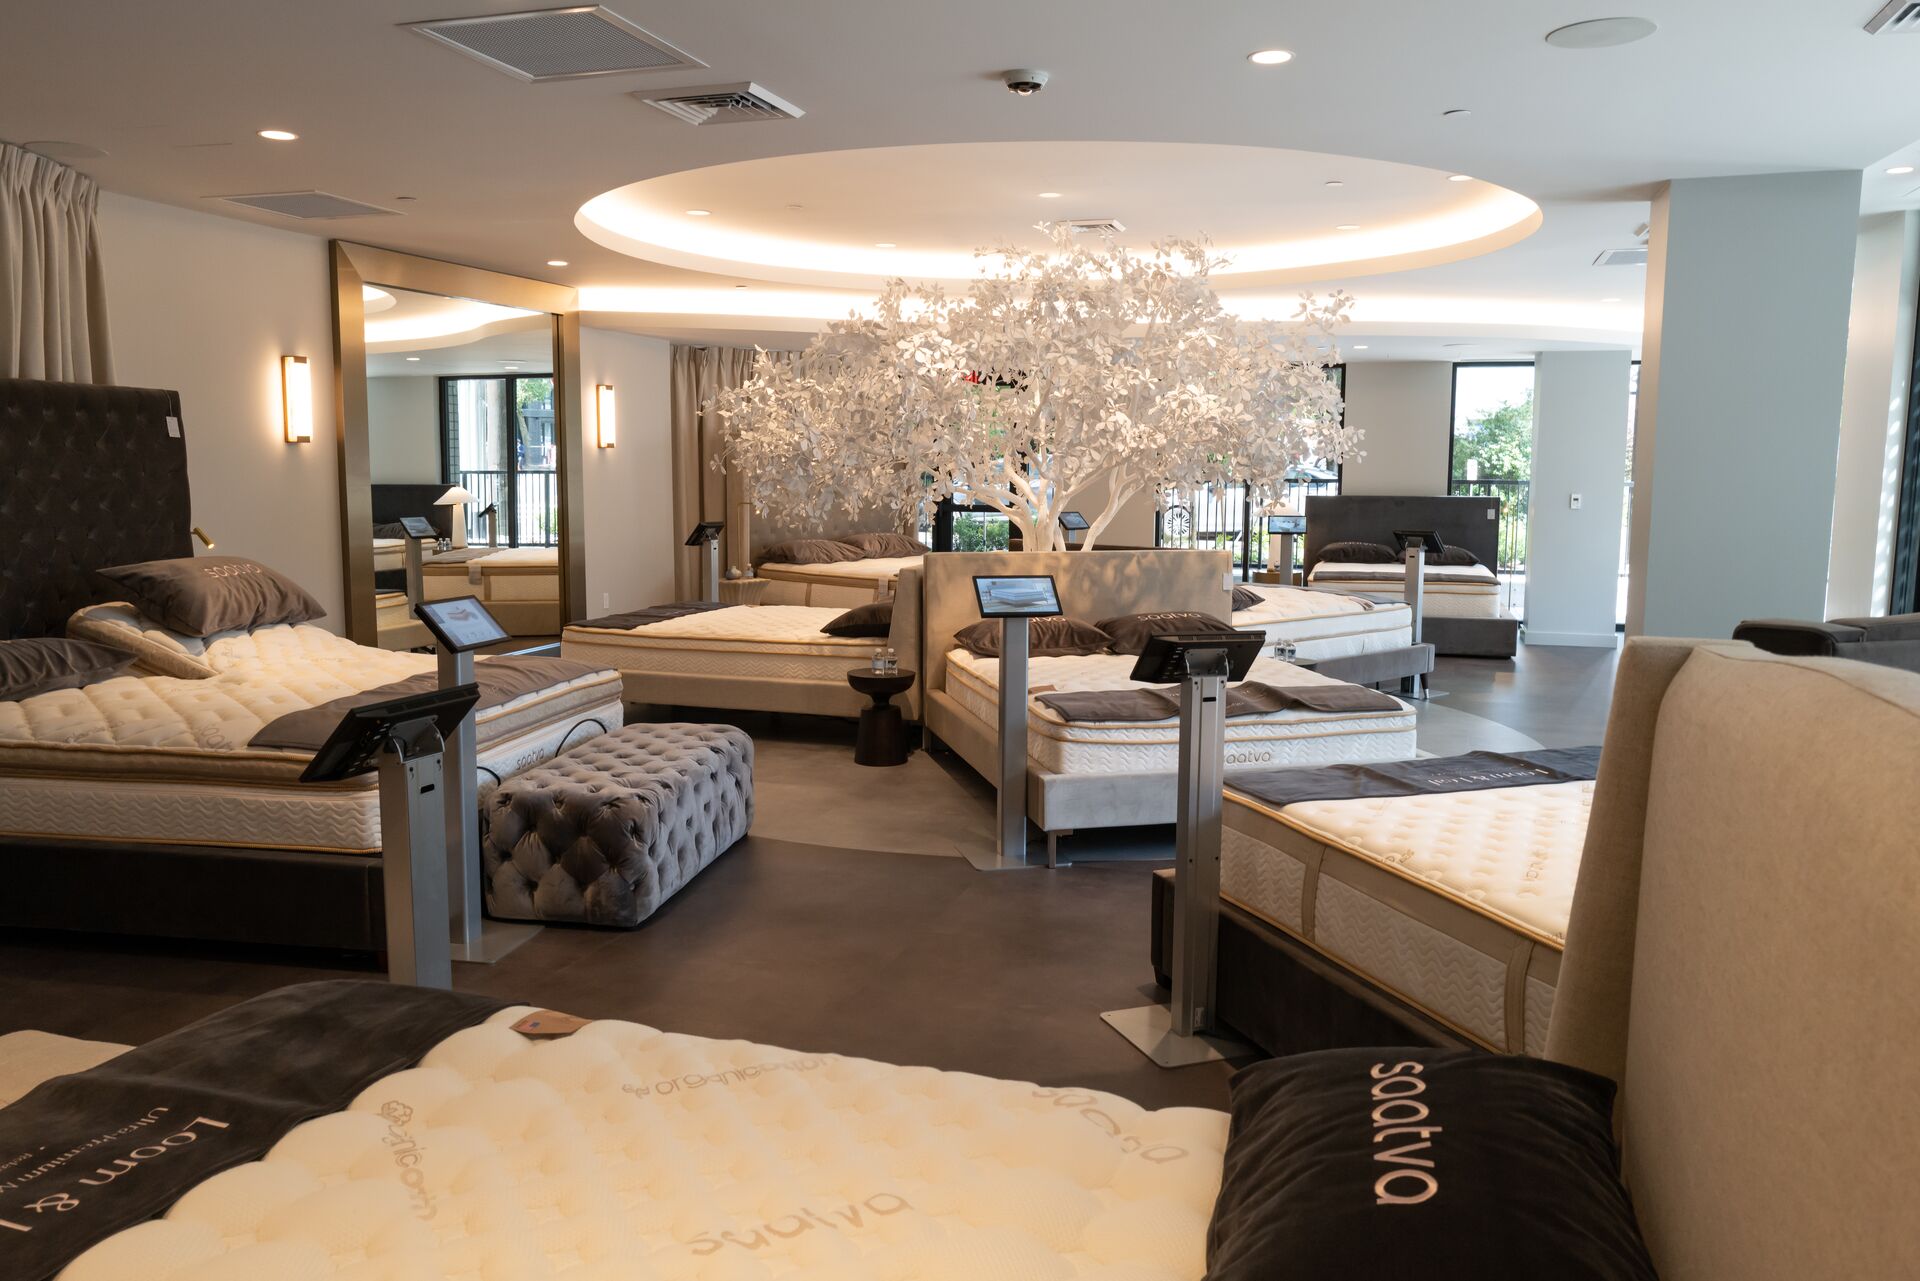 The elegant interior and mattress testing space in Saatva's modern and tranquil new University Village retail location.